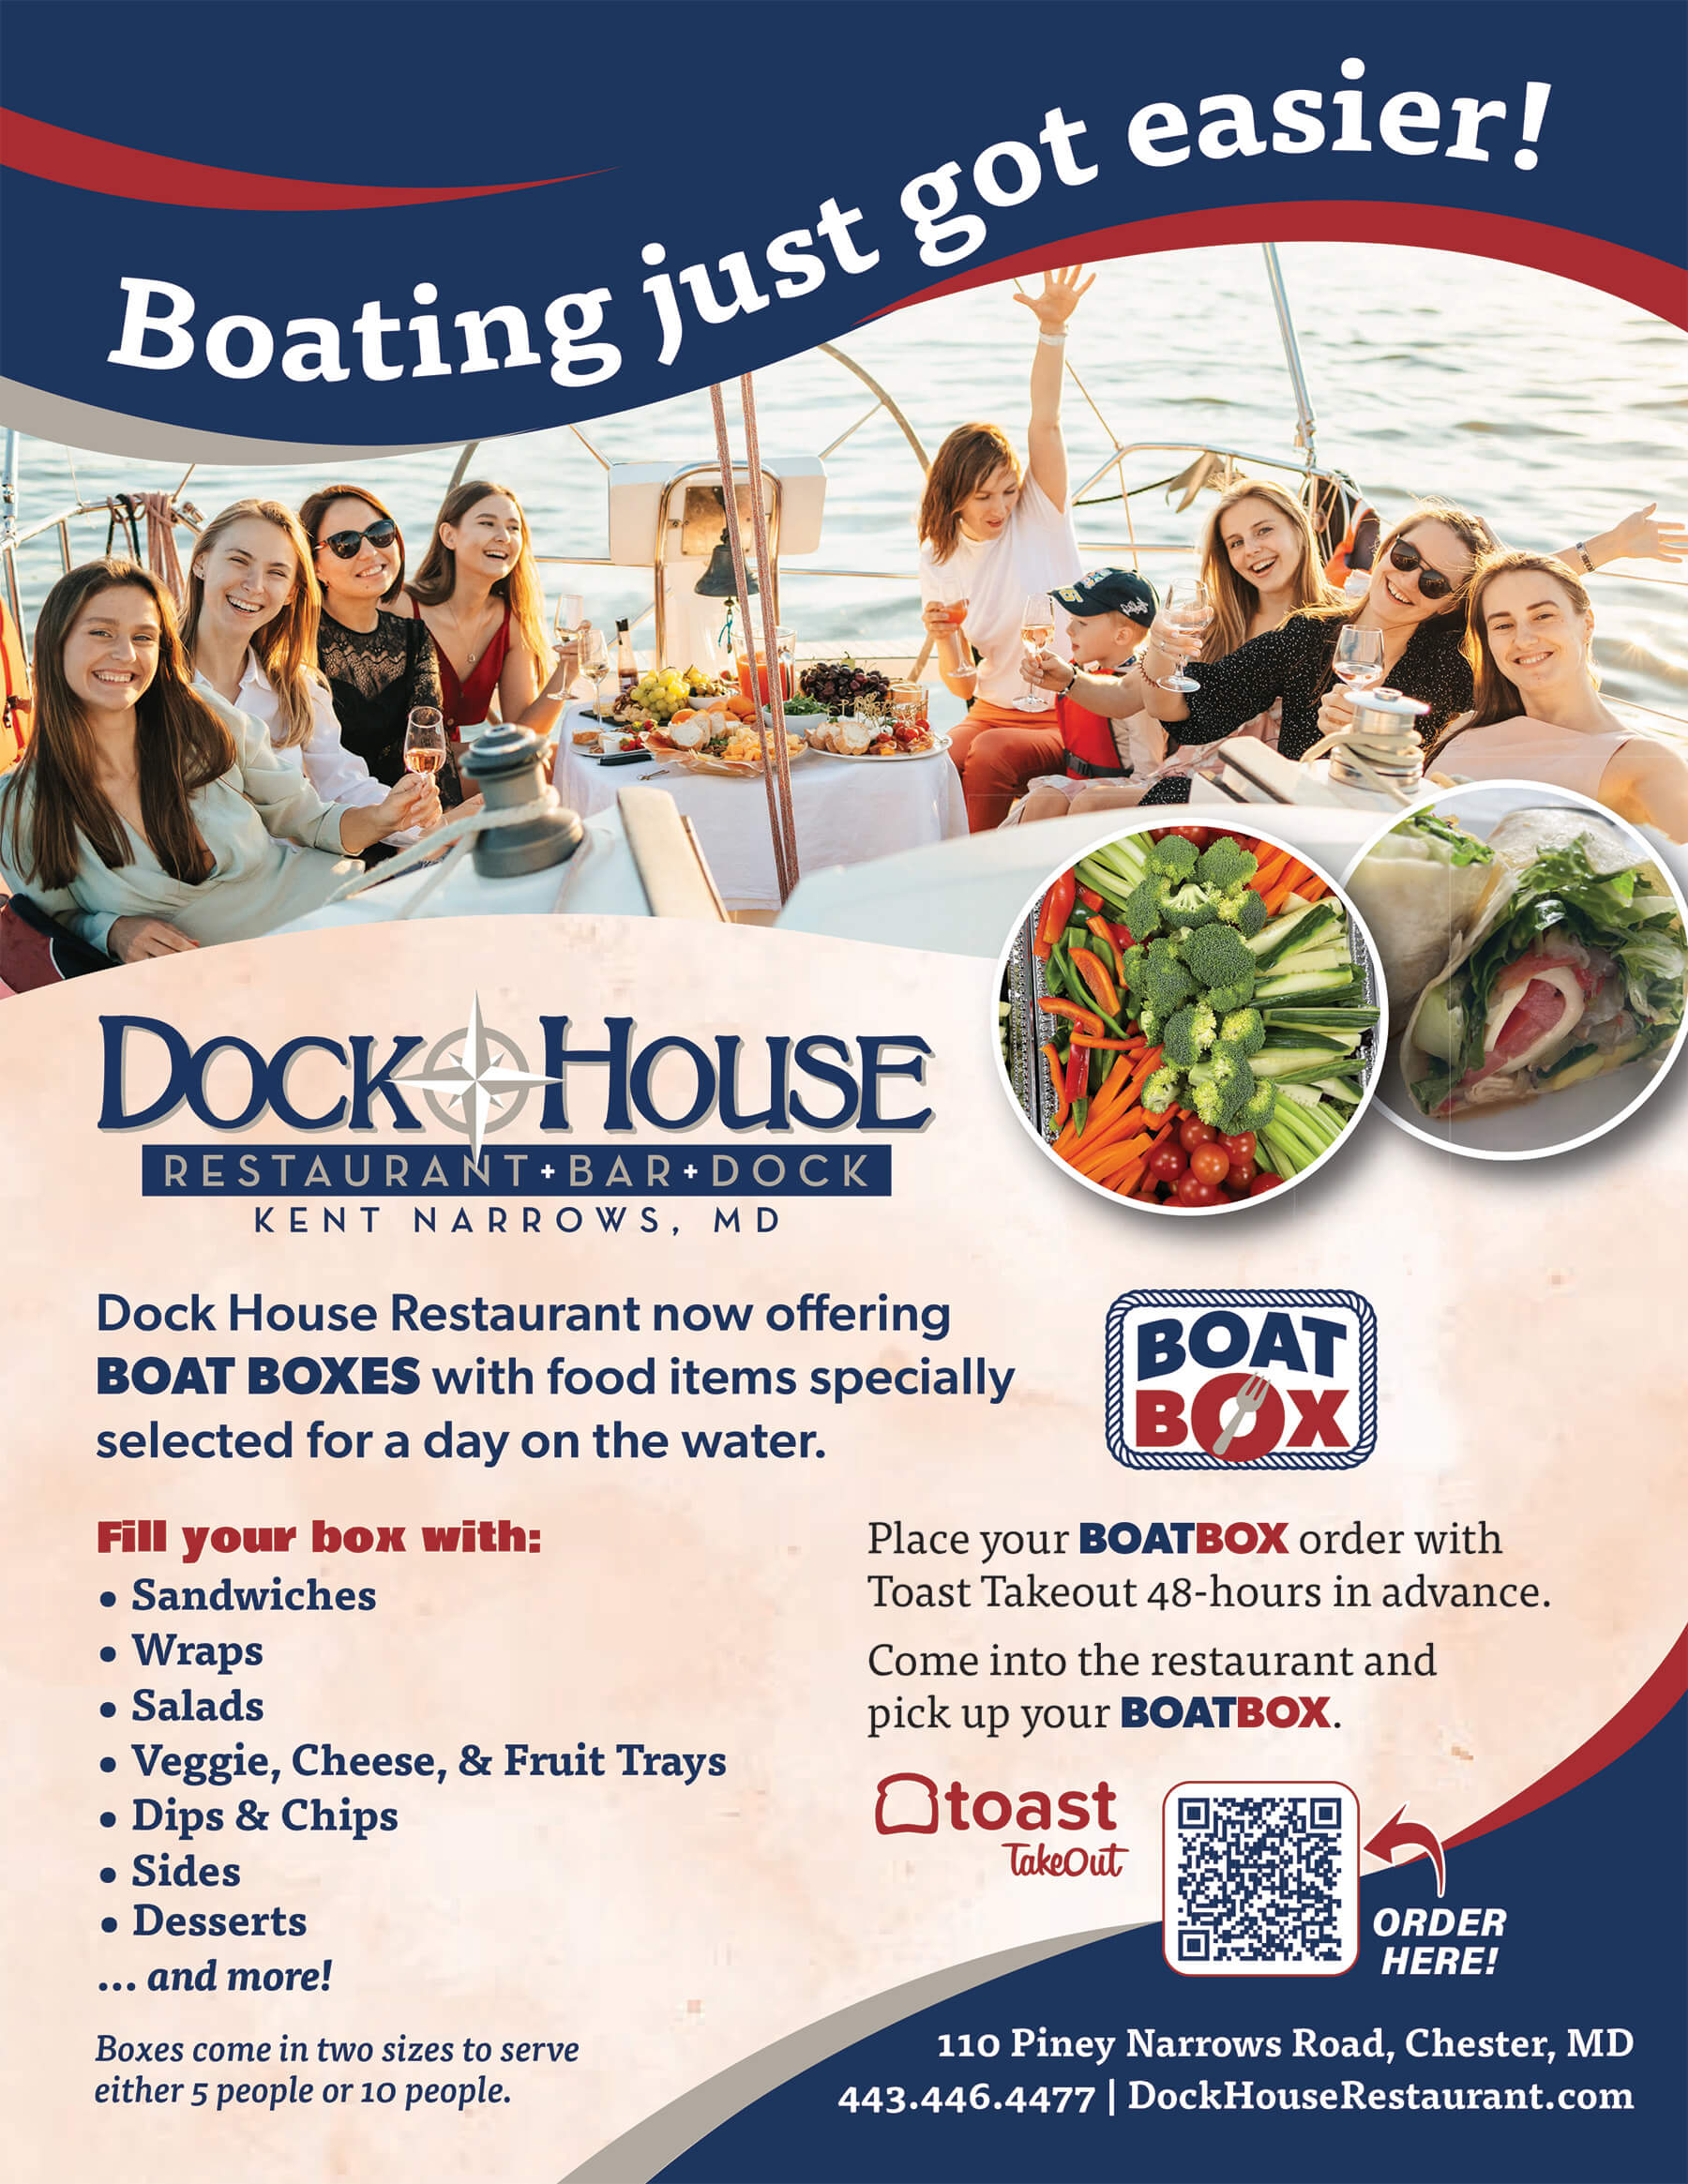 Boat Boxes Flyer - Order a Boat Box 48-hours in advance for your day on the boat.